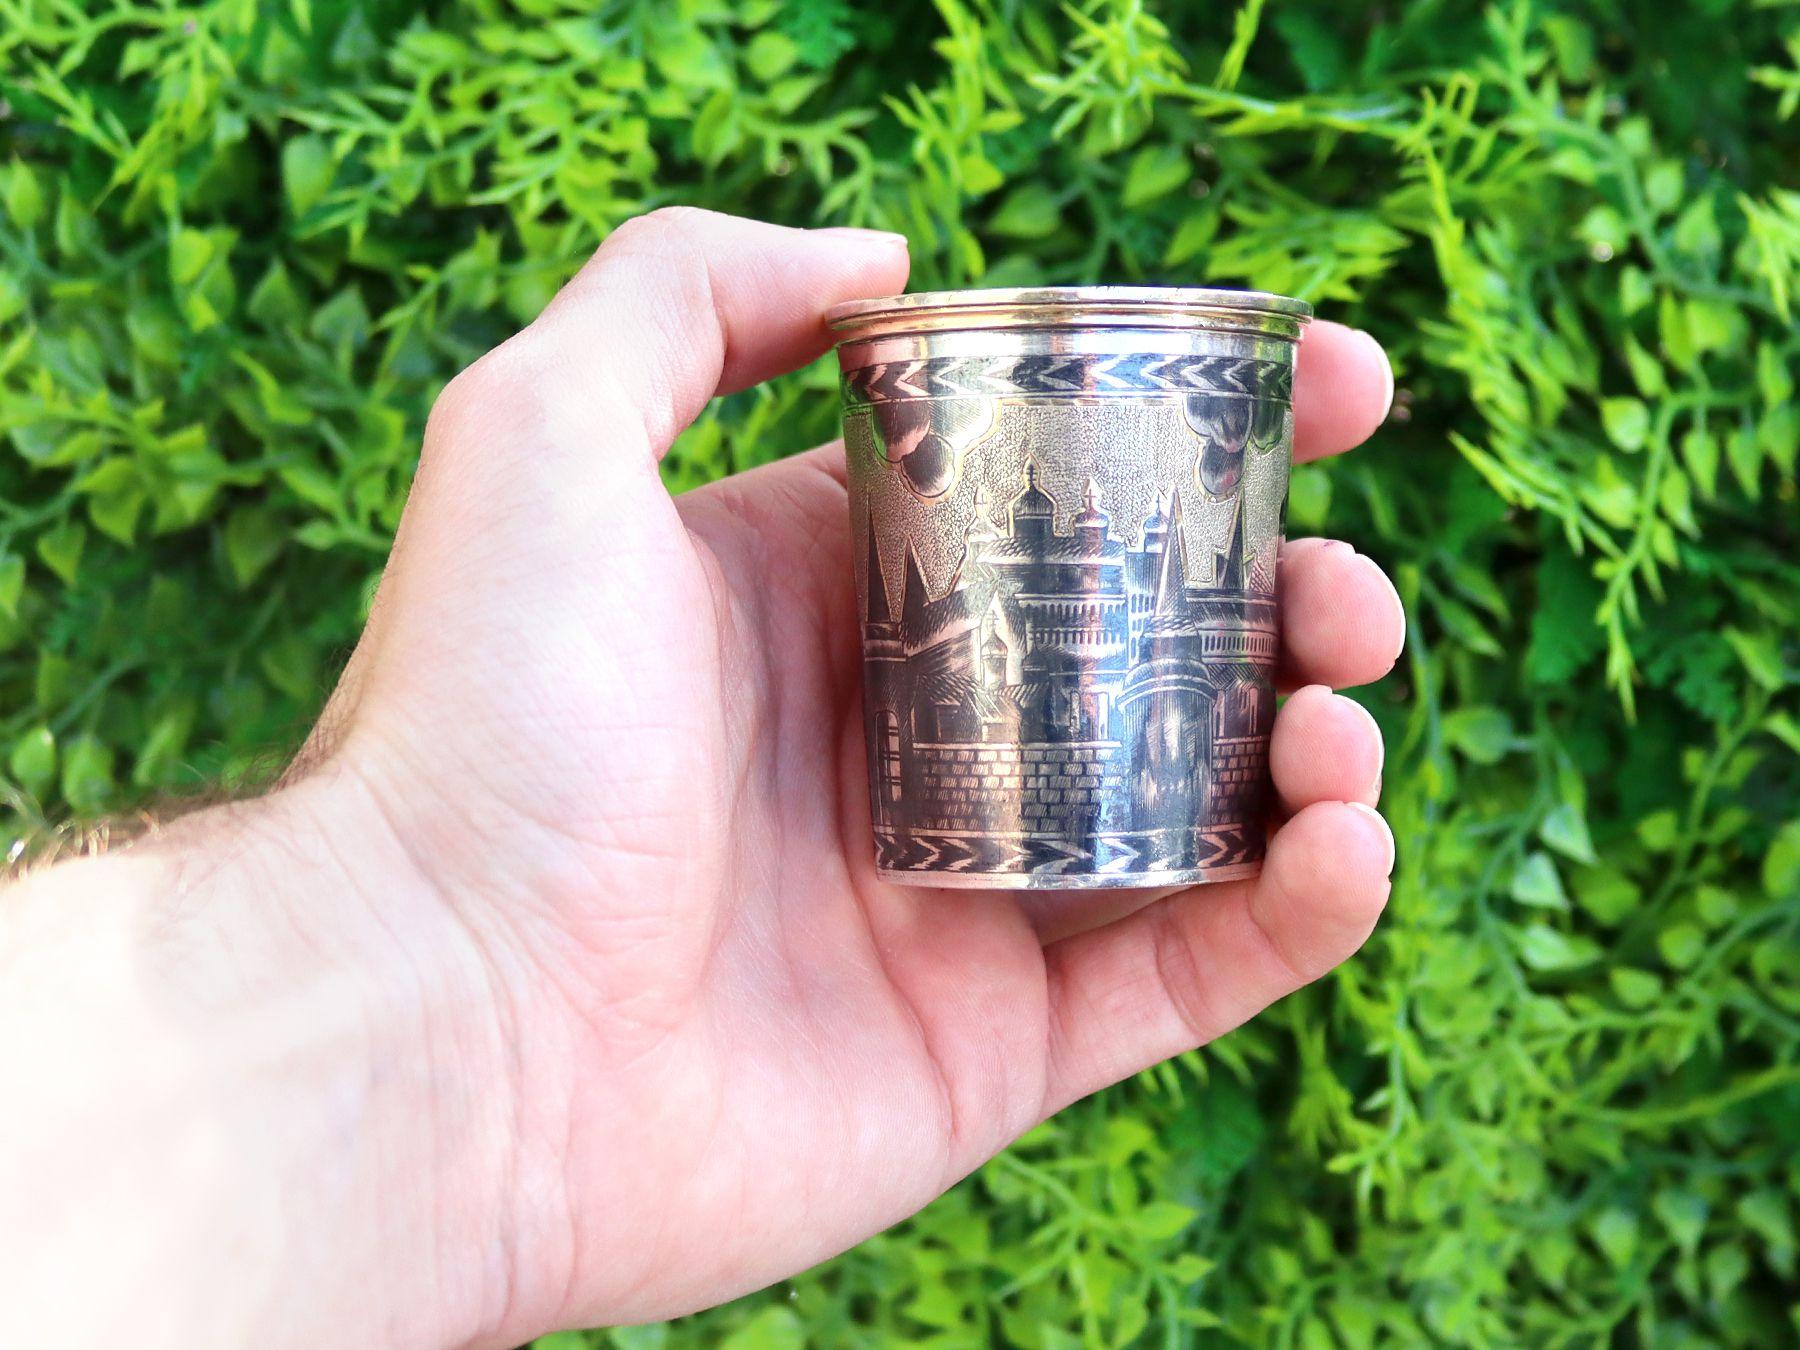 An exceptional, fine and impressive Russian silver gilt and niello enamel beaker, an addition to our Russian silverware collection.

This exceptional antique Russian silver gilt beaker has a cylindrical, tapering form.

The surface of this